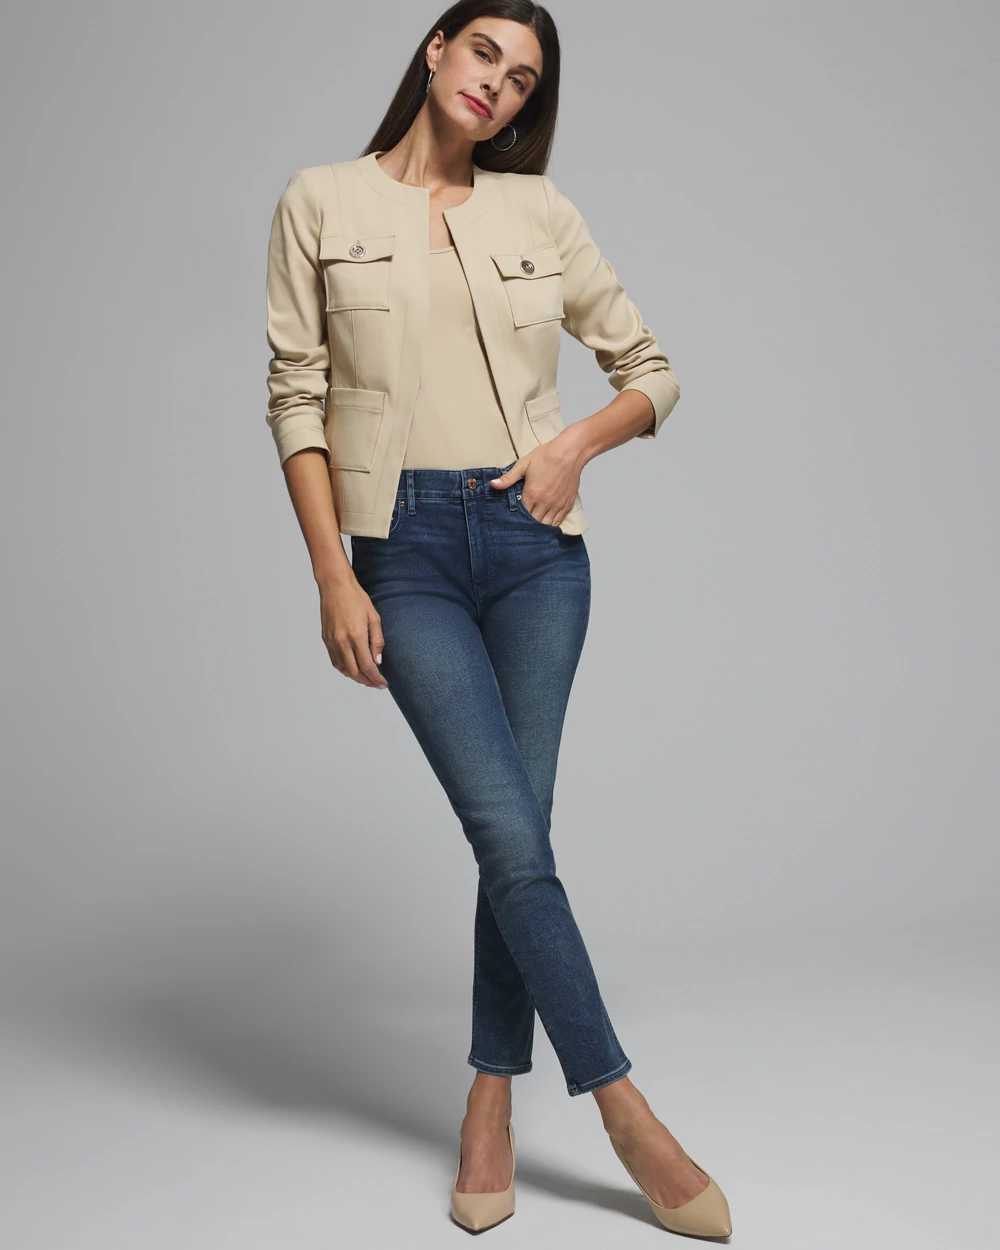 Outlet WHBM Long Sleeve Collarless Jacket click to view larger image.